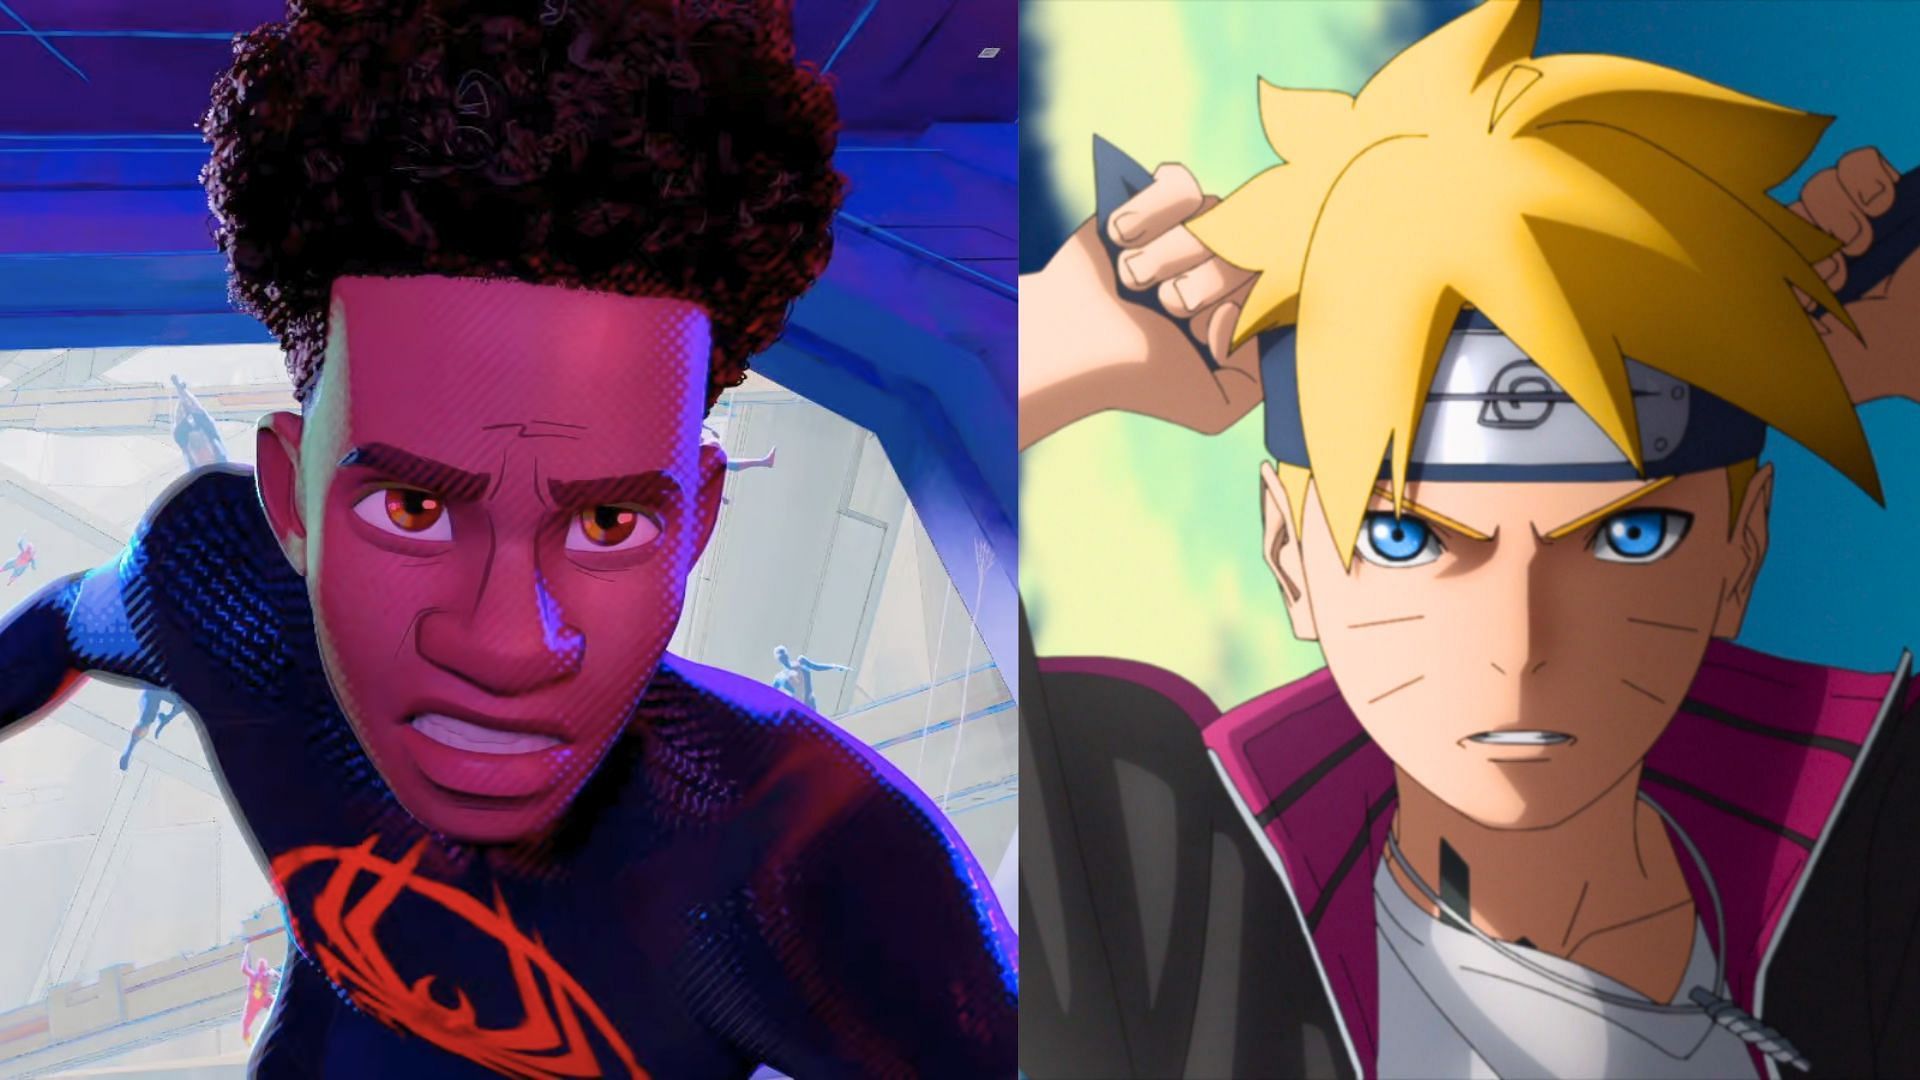 Miles Morales from Spider-Man: Across the Spiderverse and Boruto from Boruto series (Image via Sony Pictures Animation and Pierrot)